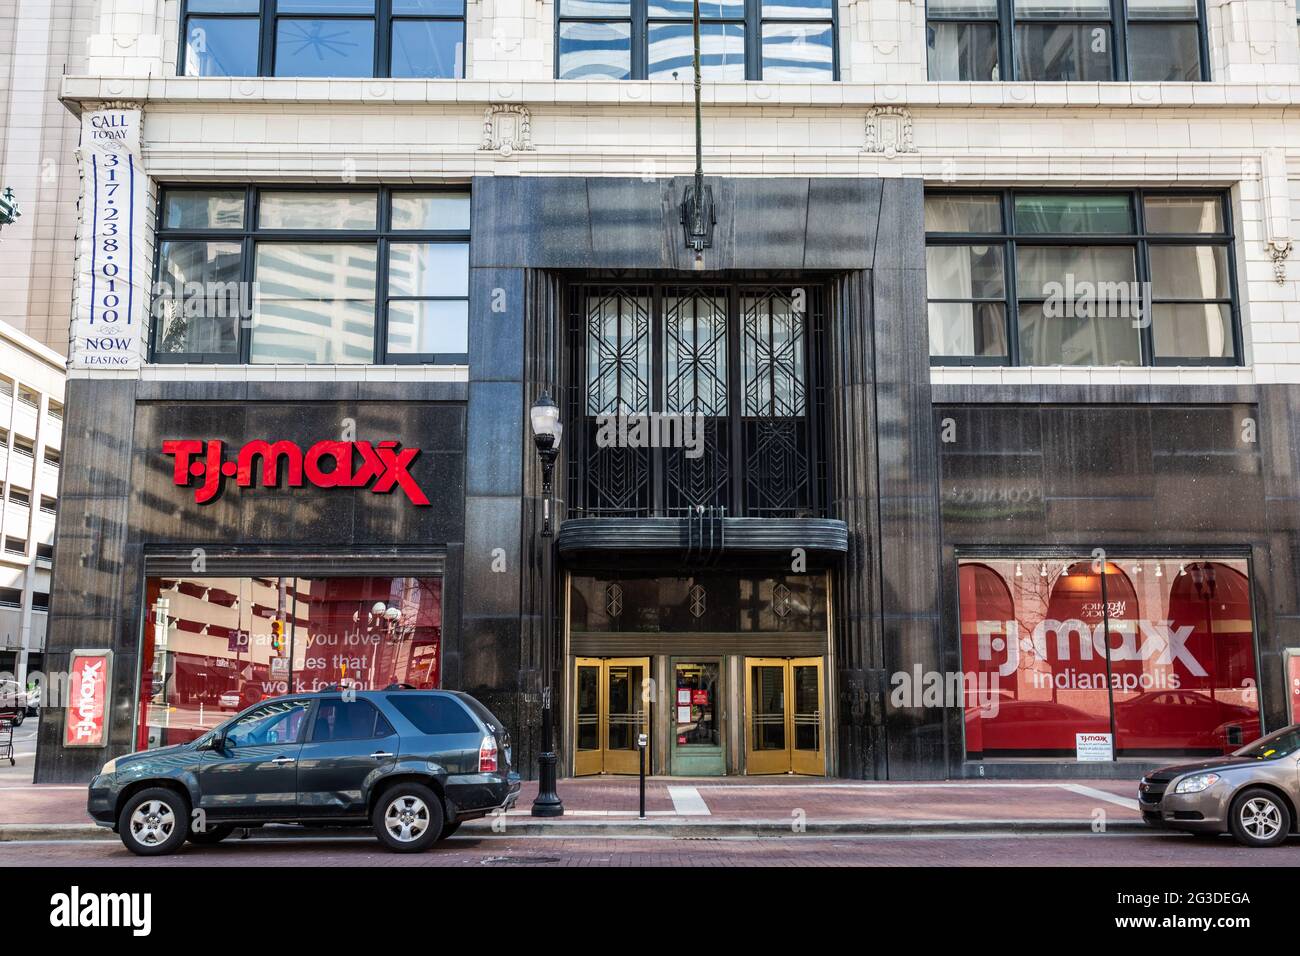 T j maxx store hi-res stock photography and images - Alamy